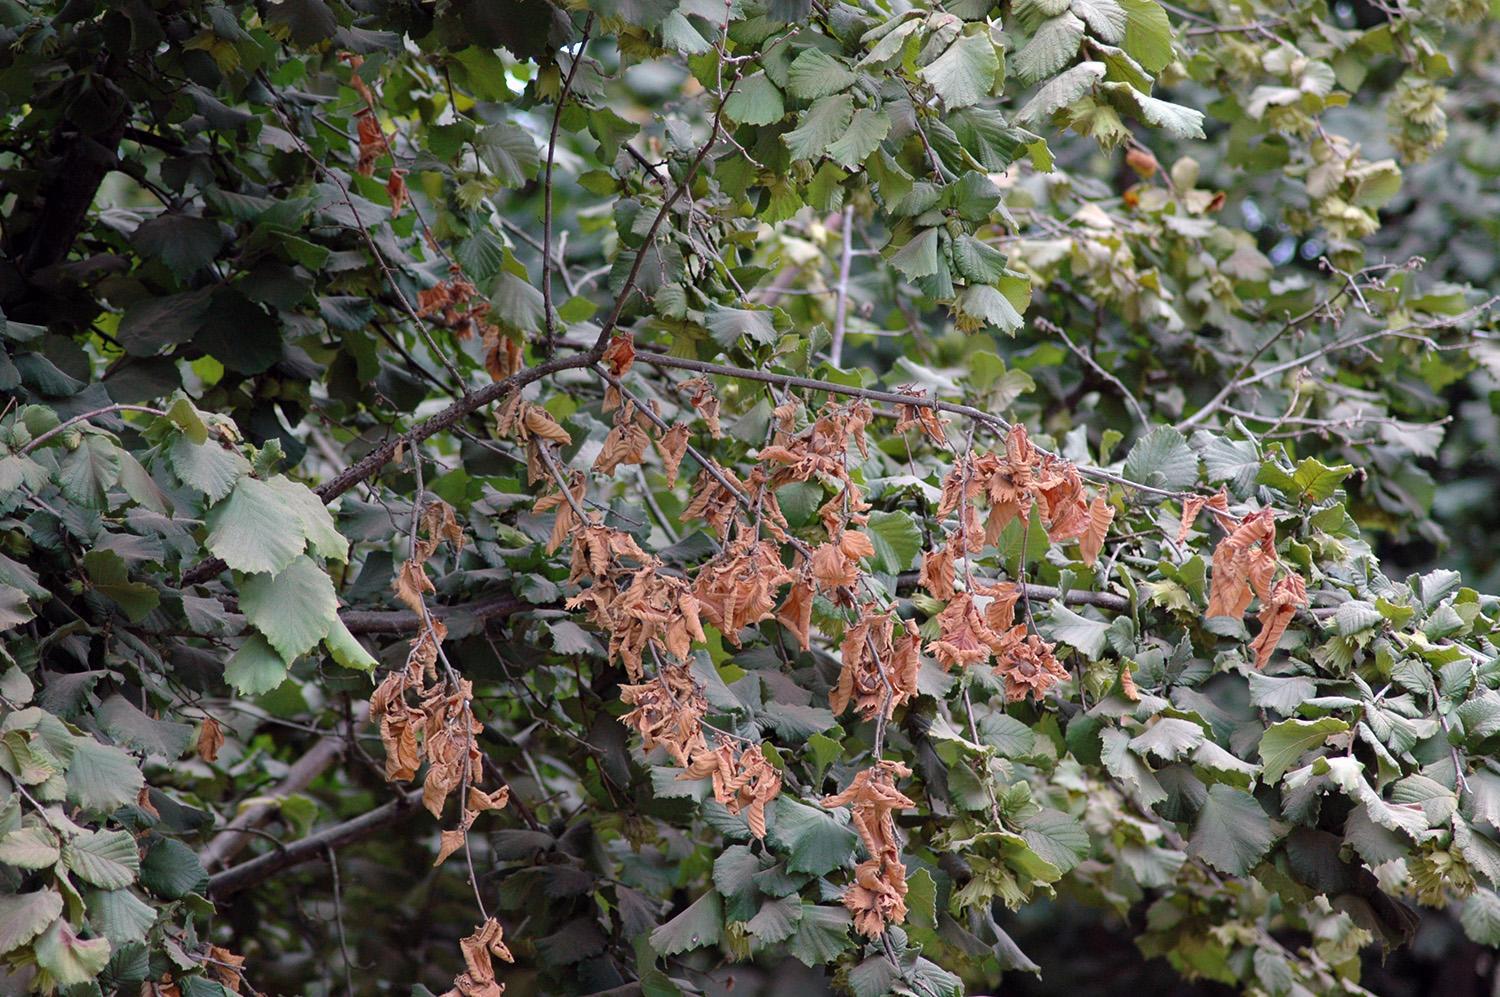 Brown, withered leaves stand out on a tree infected with eastern filbert blight.